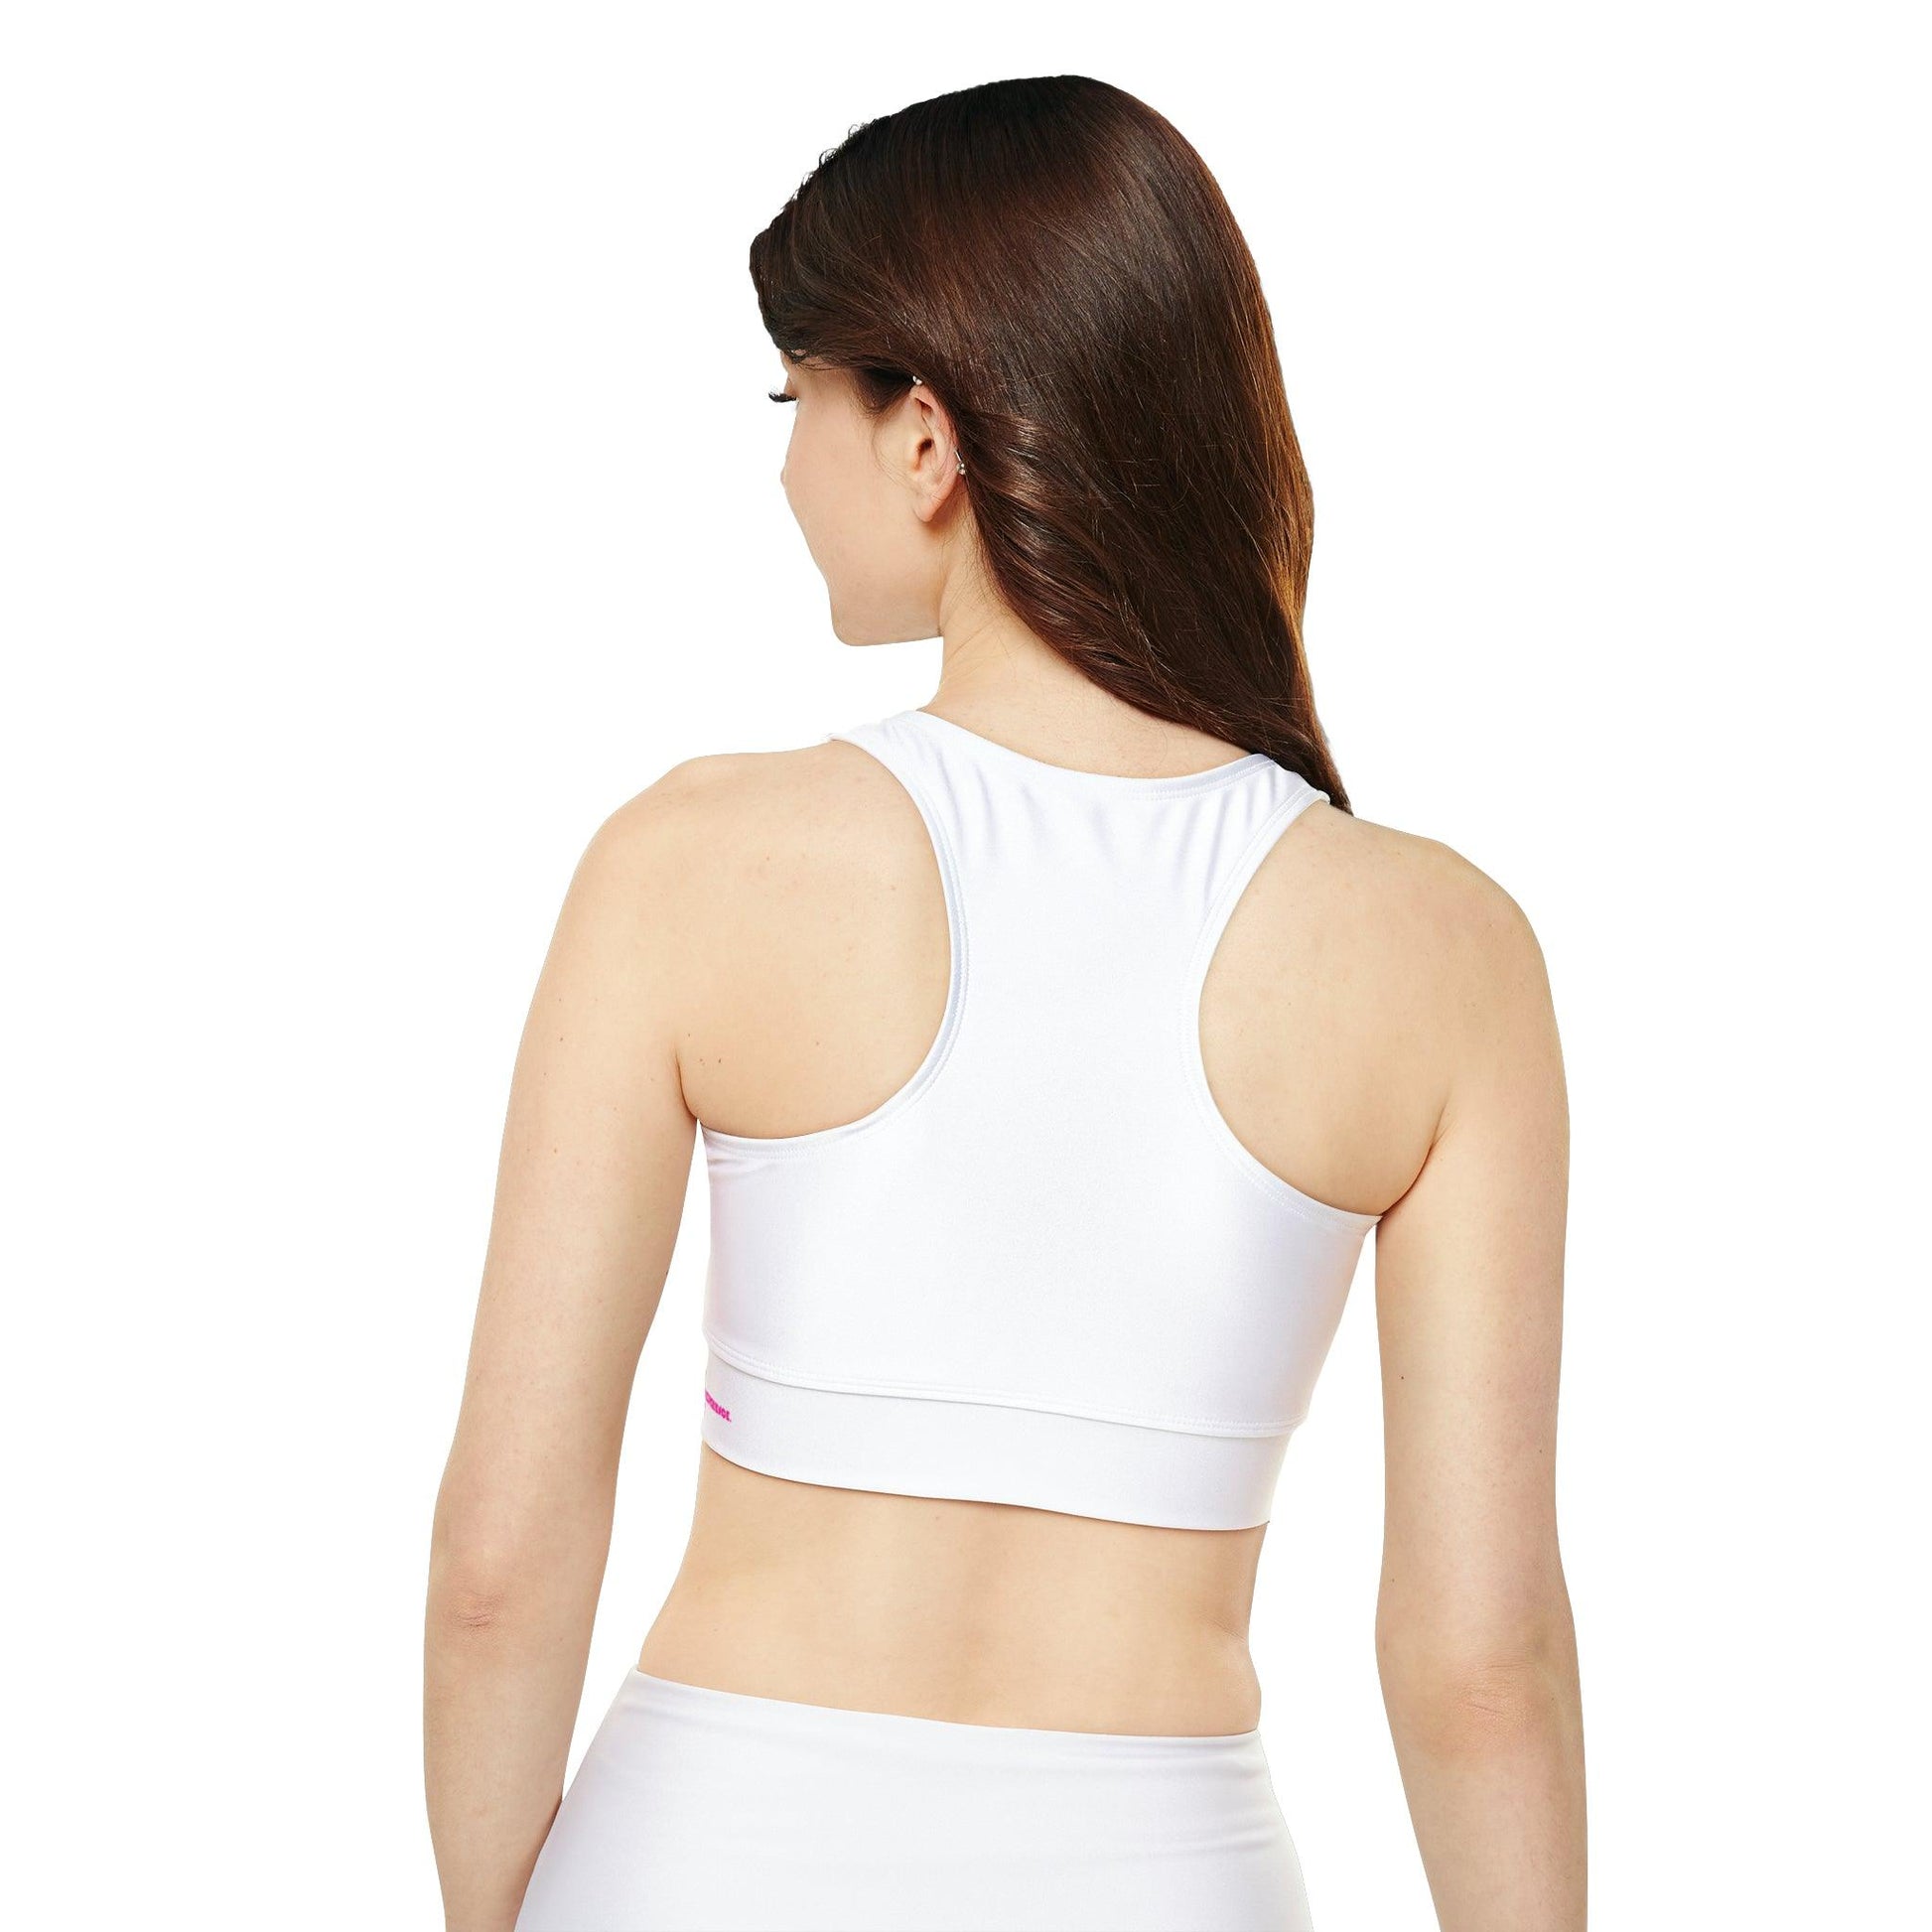 Coffeebre Lifestyle Fully Lined, Padded Sports Bra - COFFEEBRE